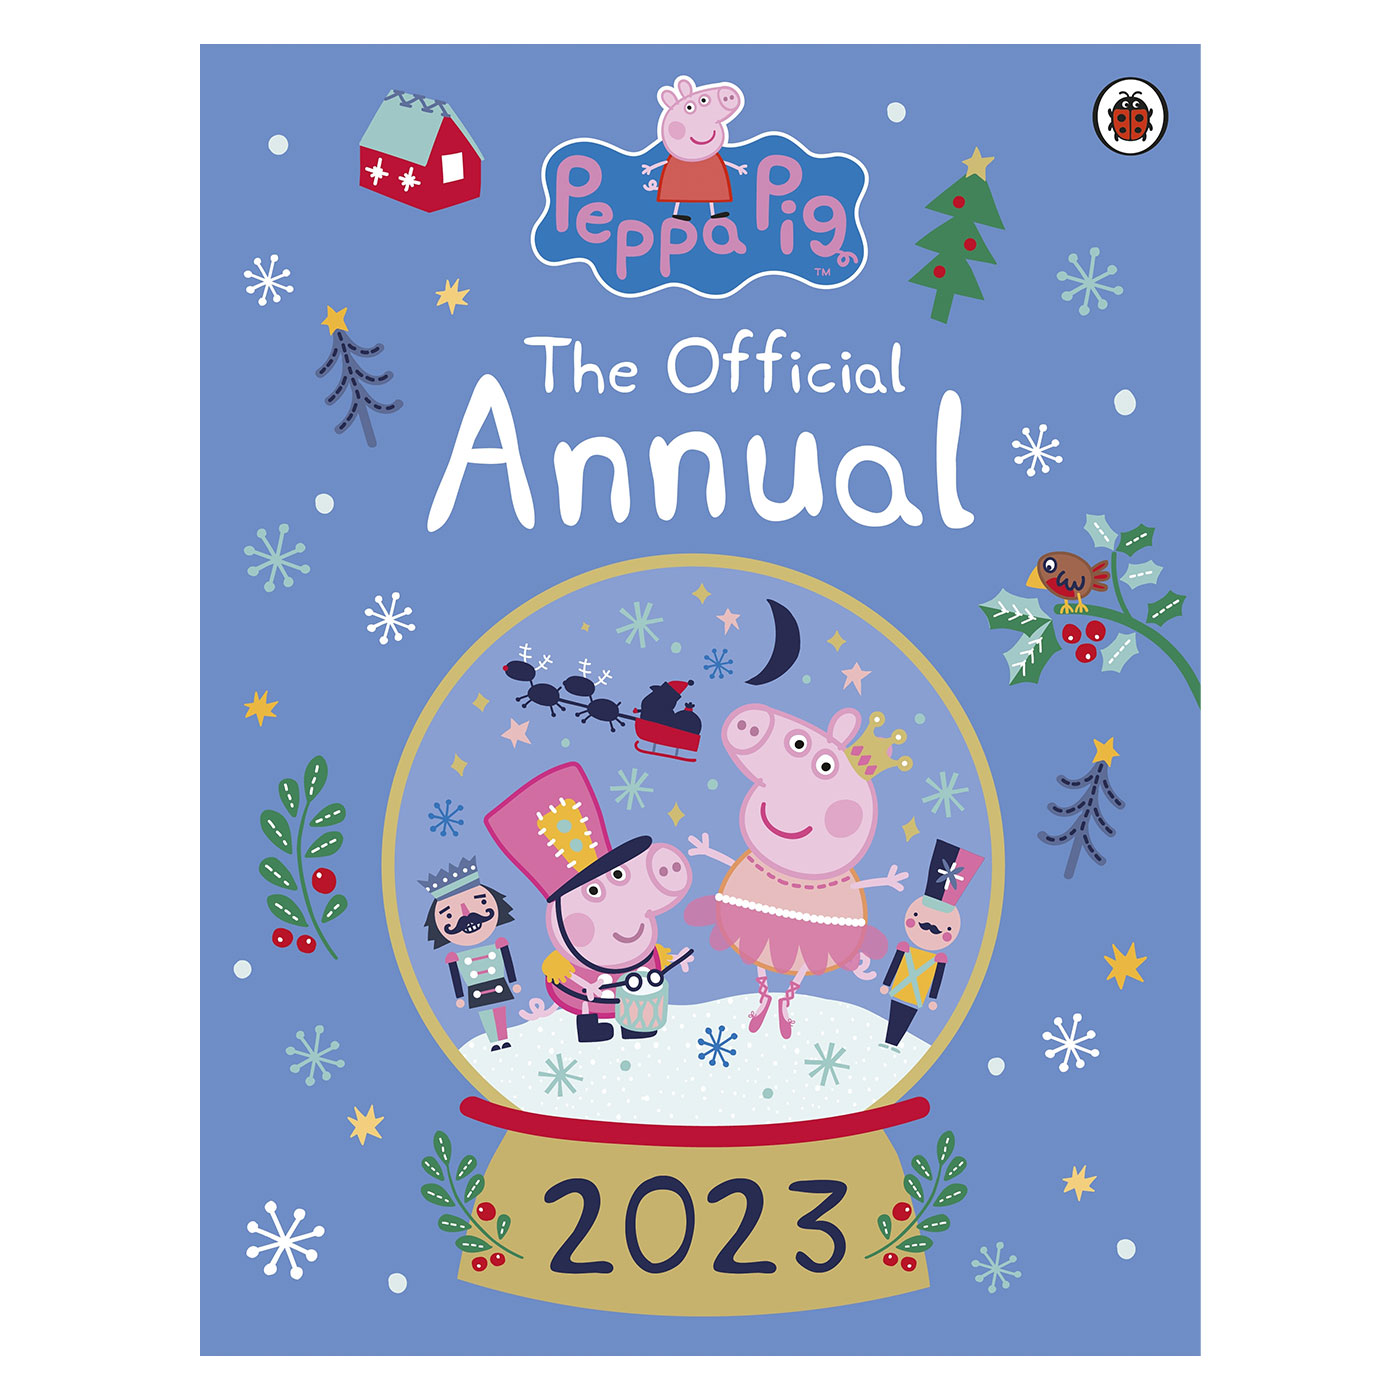 LADYBIRD Peppa Pig: The Official Annual 2023